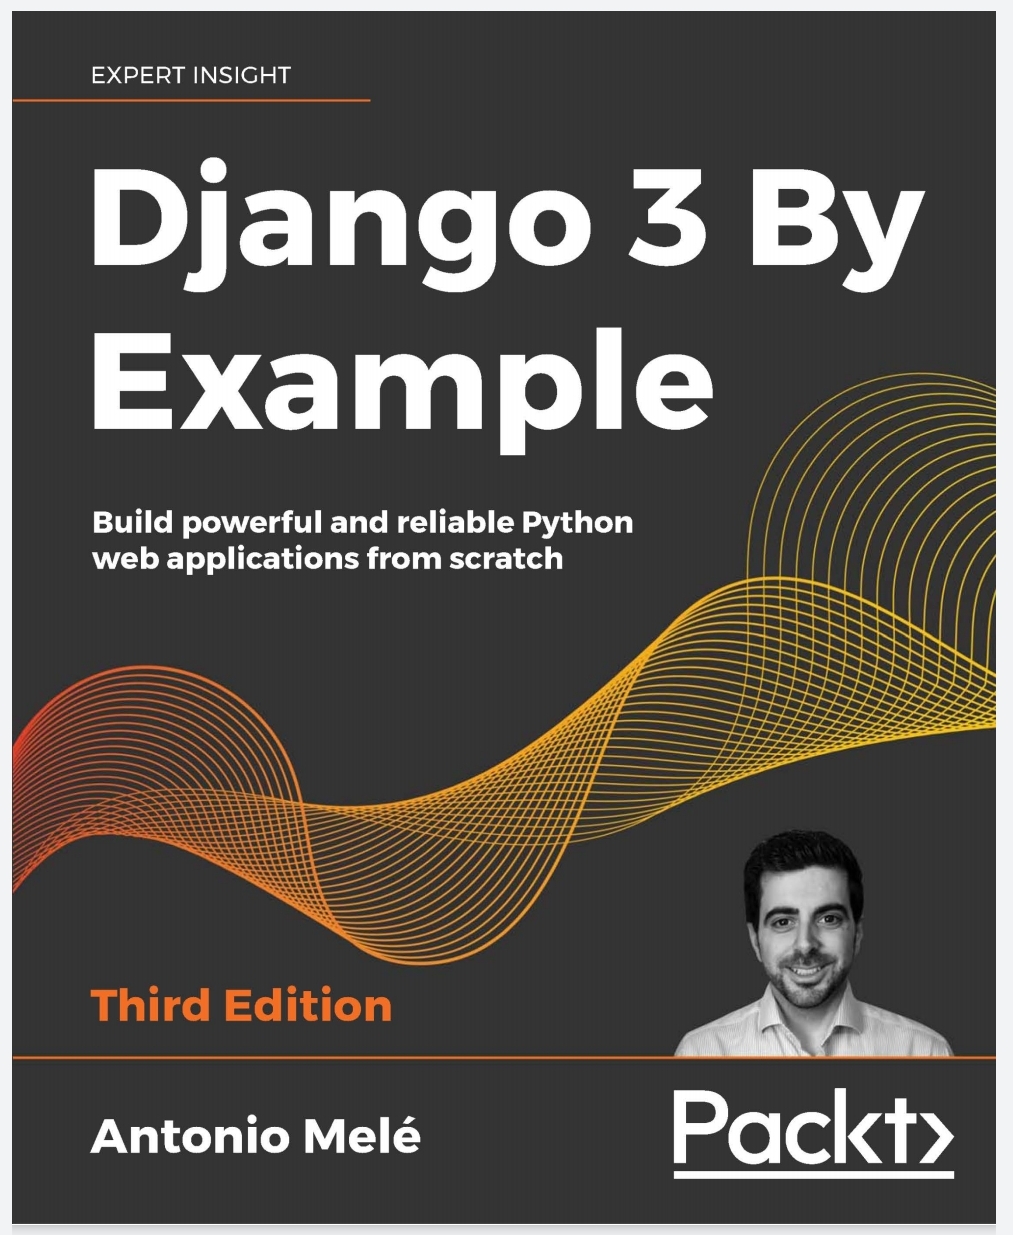 Django By Example Build Powerful And Reliable Python Web